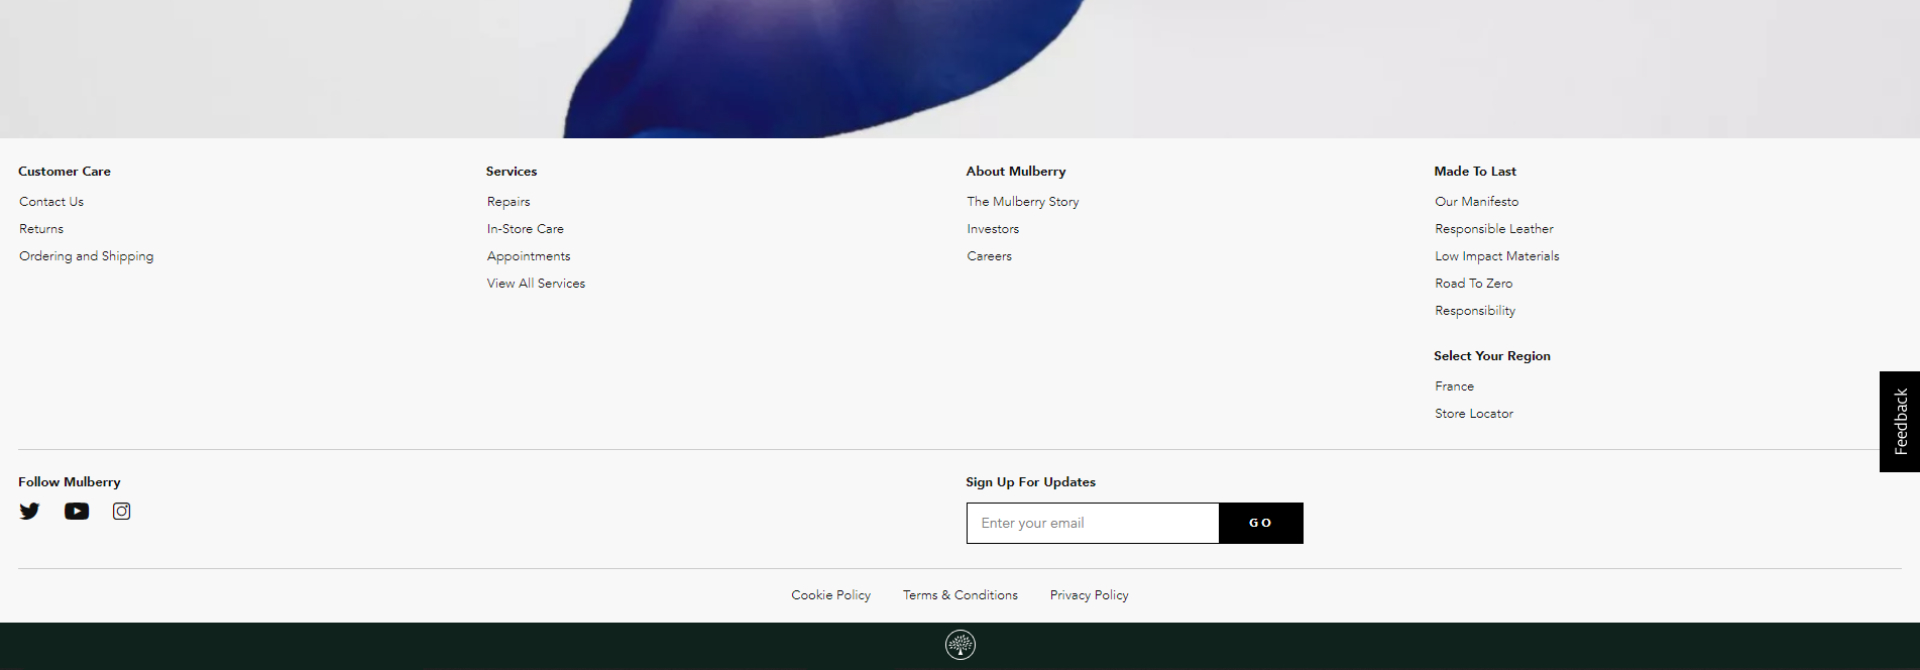 Footer in Mulberry online store